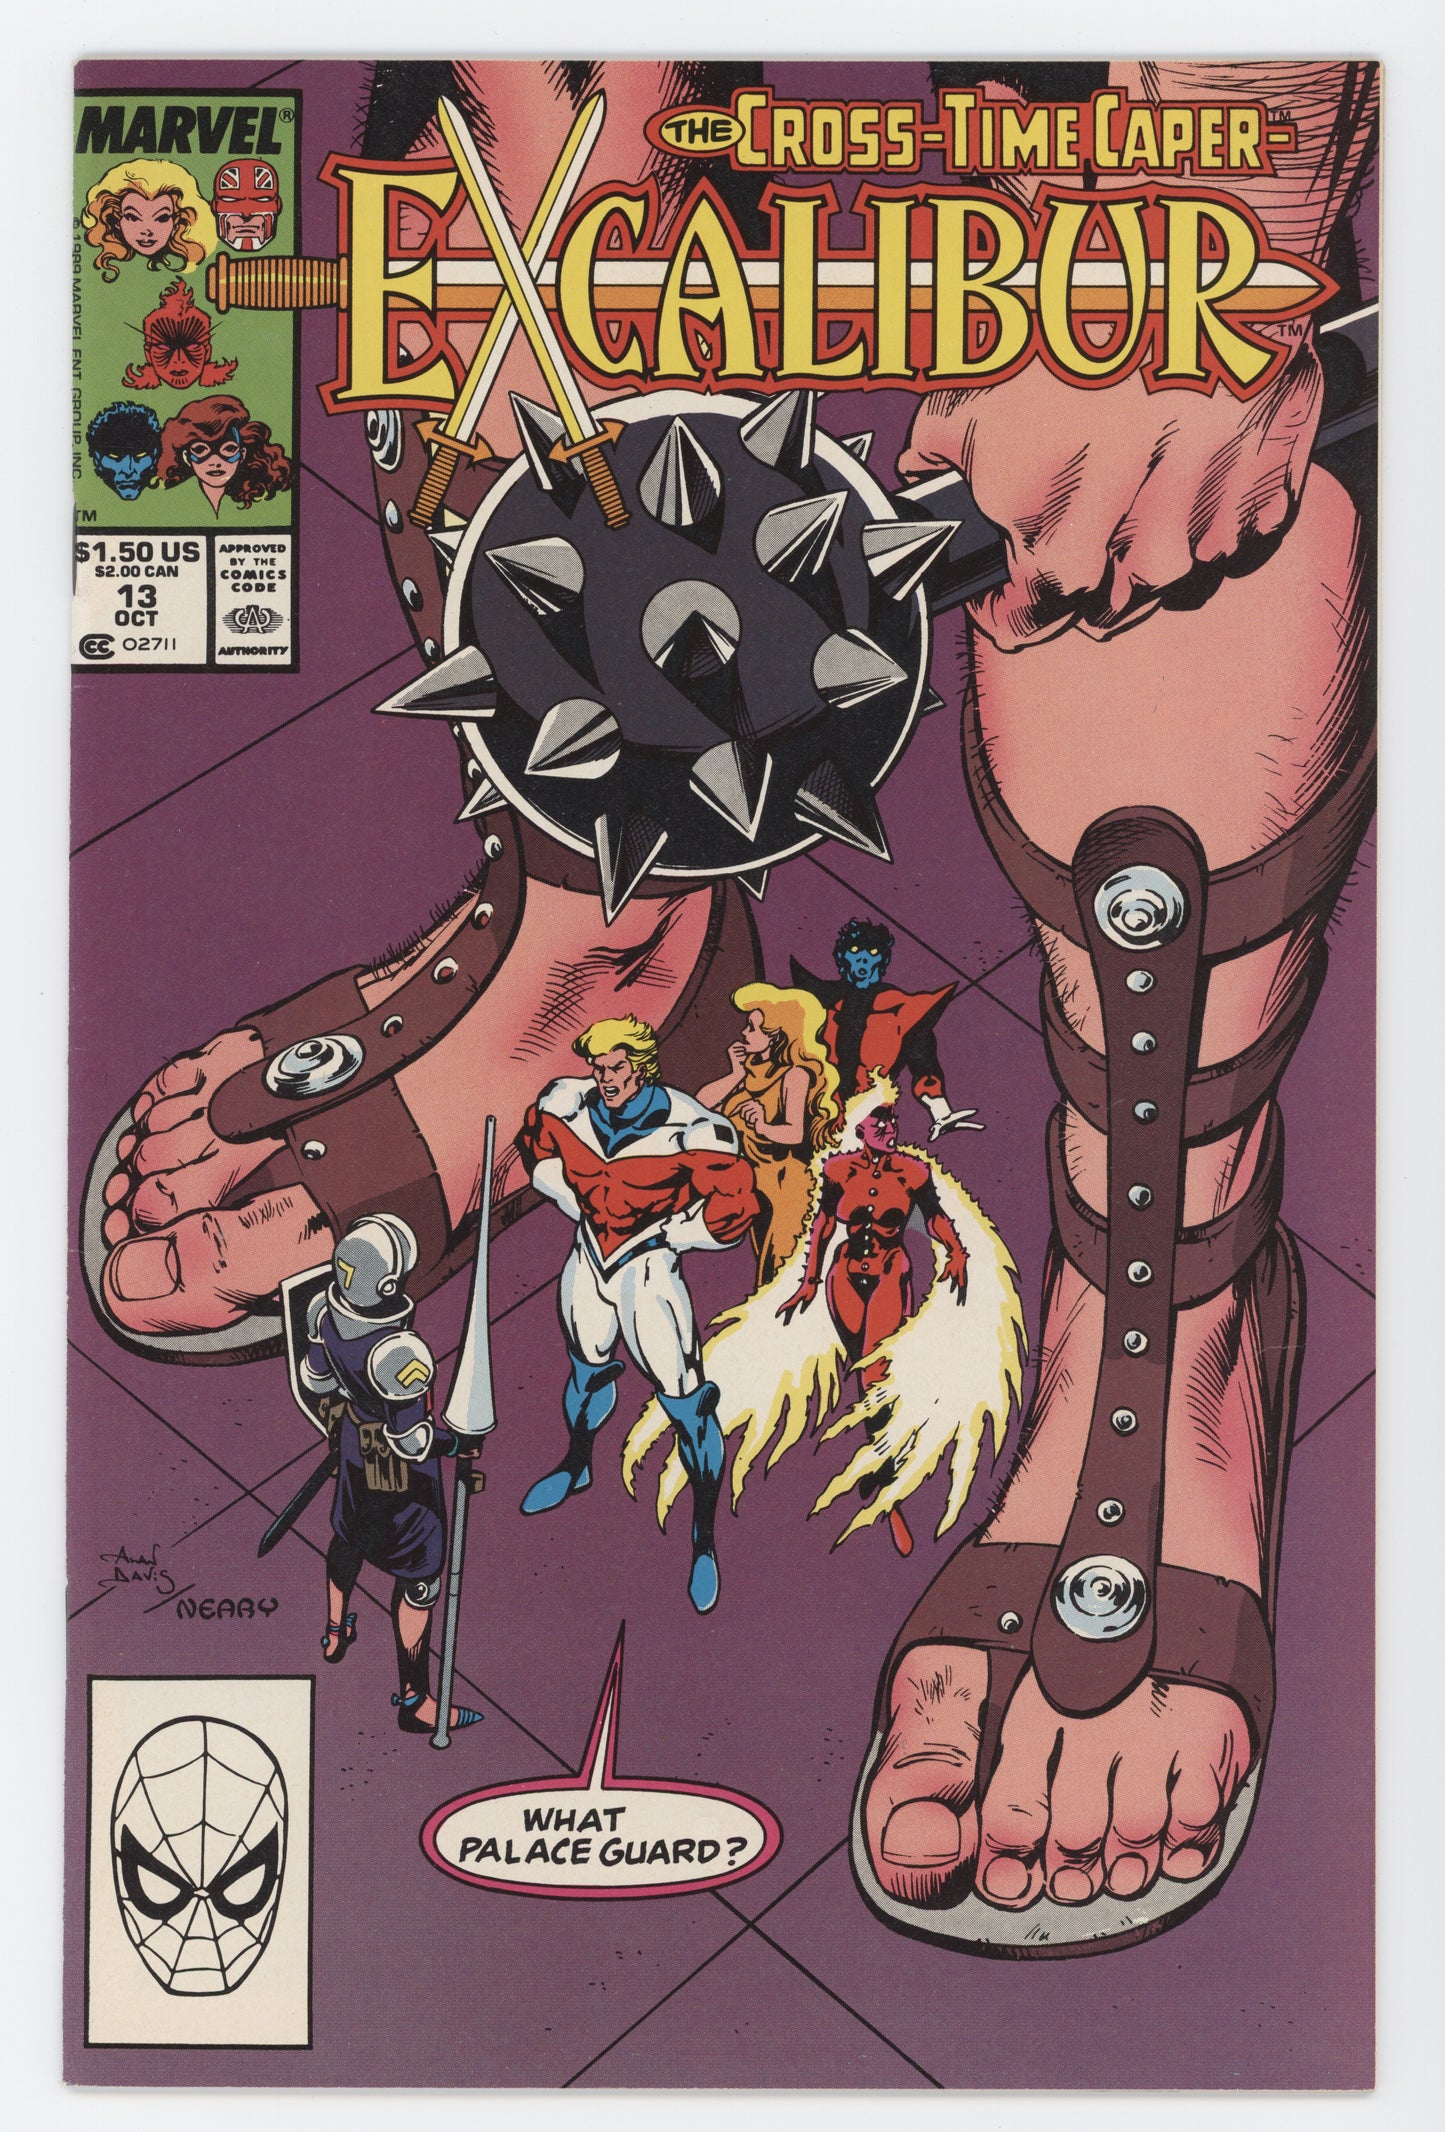 Excalibur 13 1st Series Marvel 1989 NM Phoenix Kitty Pryde Cross Time Caper